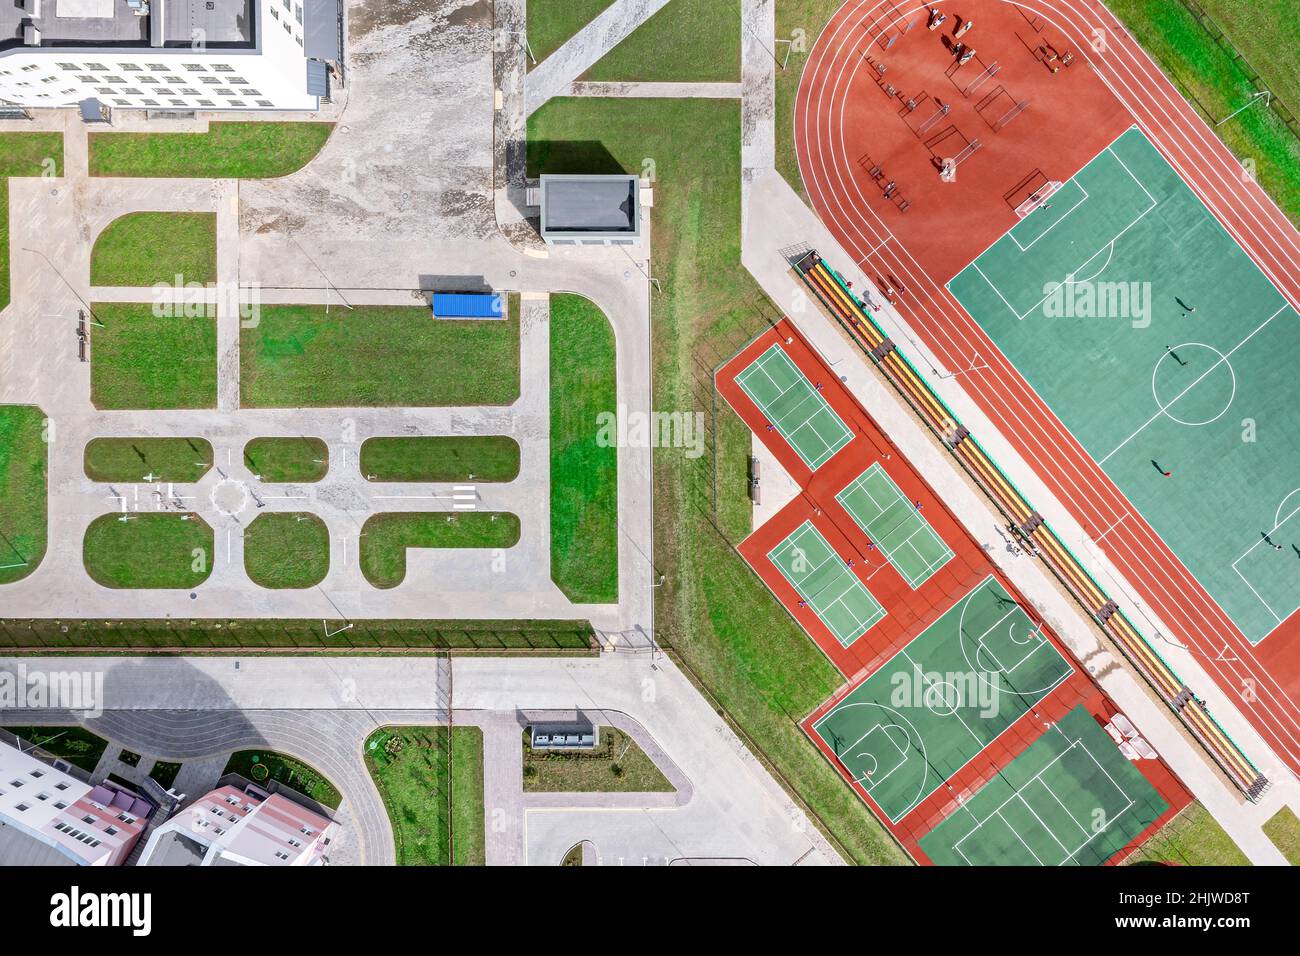 aerial top view of school courtyard with new sports grounds for team games of sport. drone photo. Stock Photo